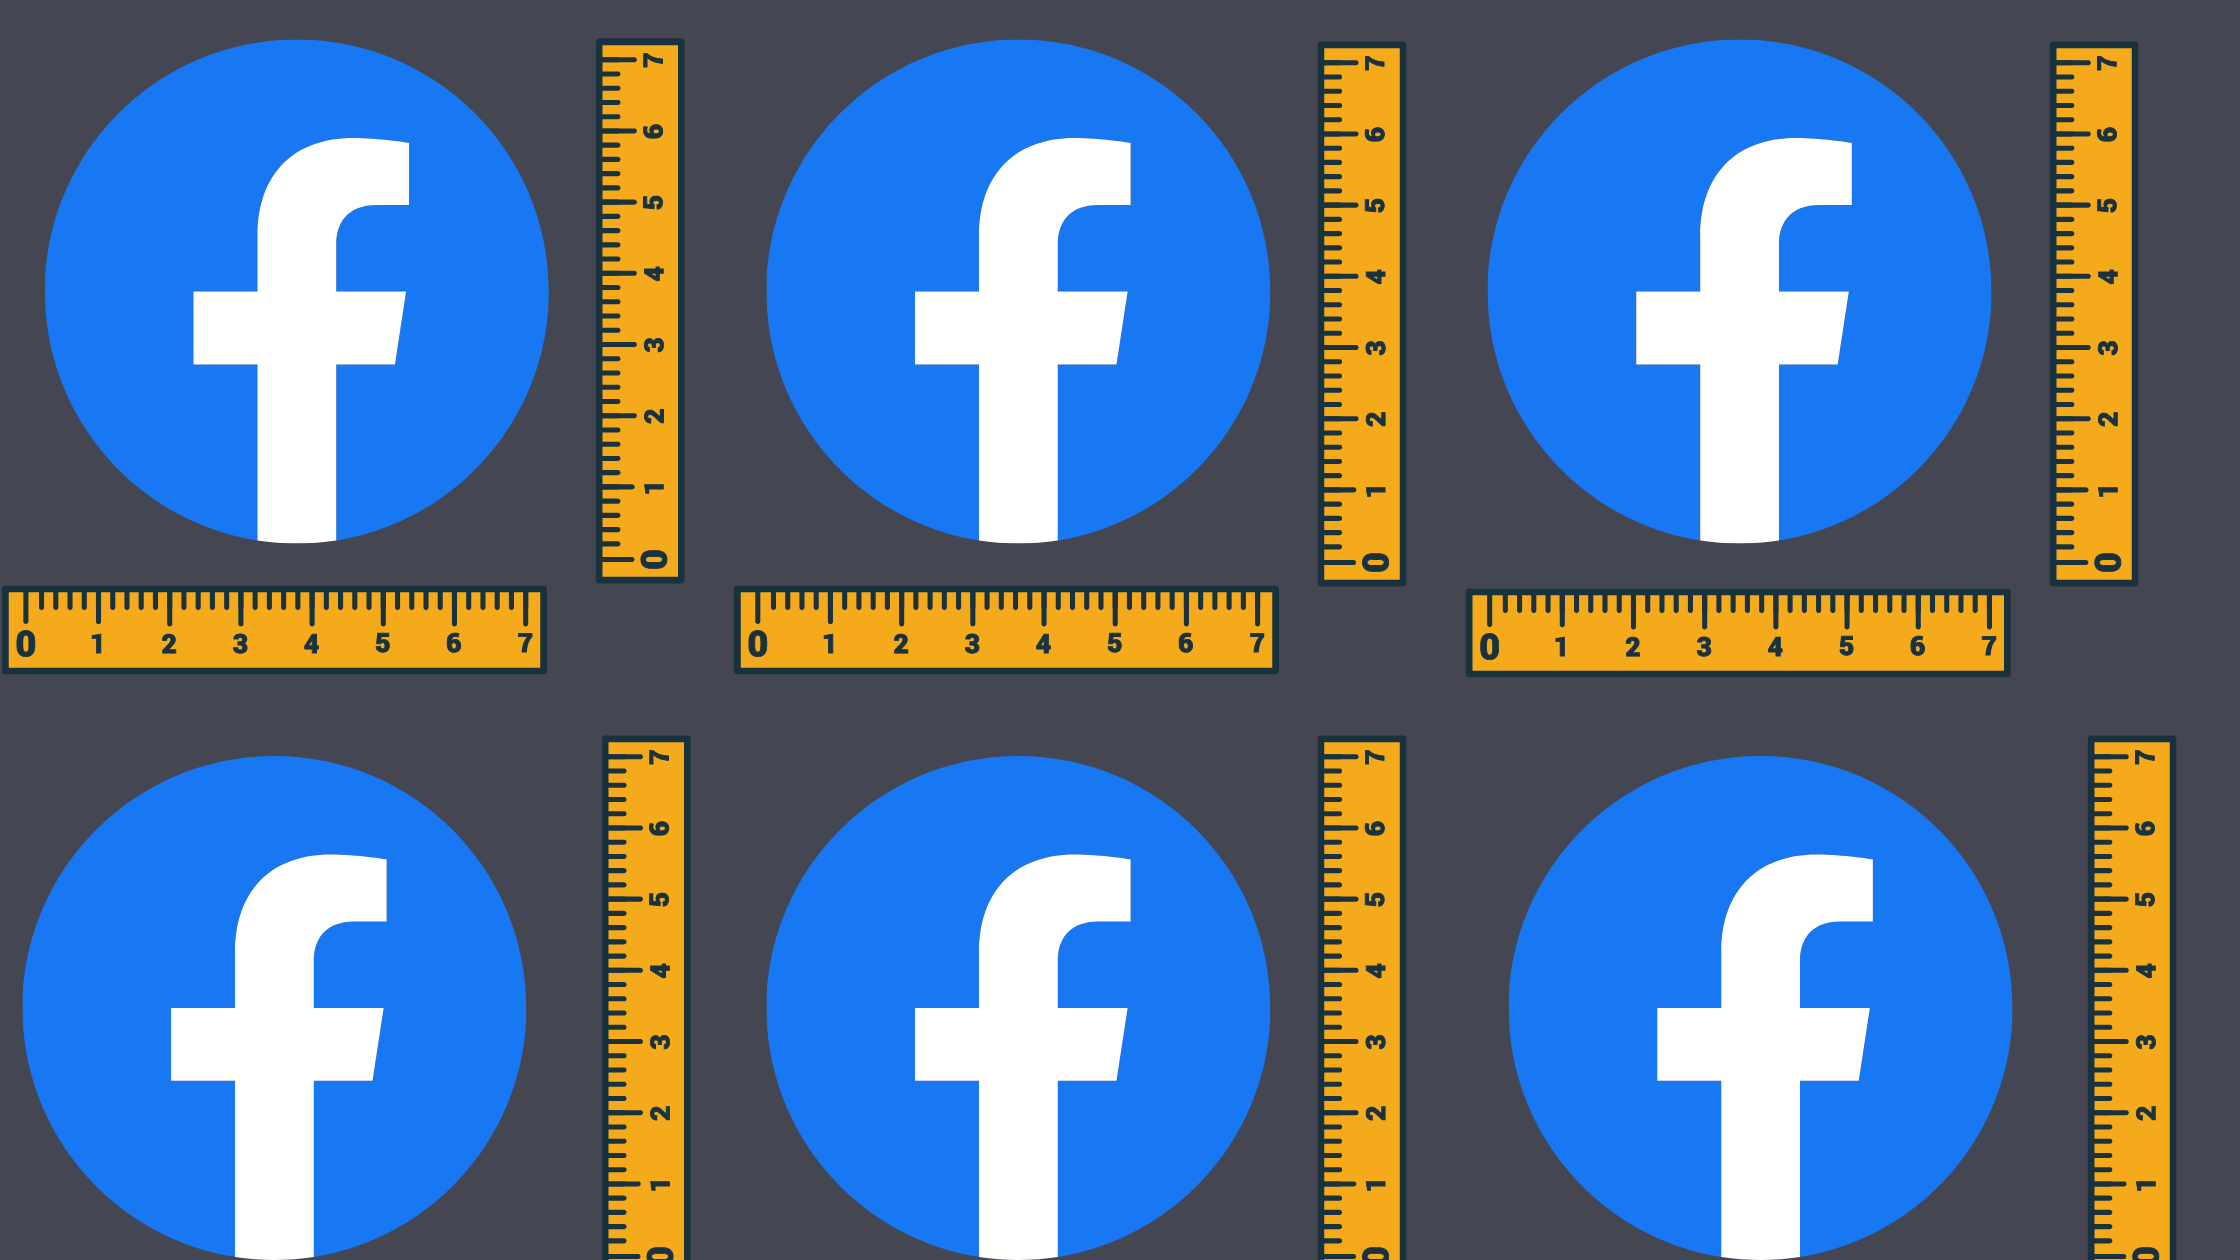 The Facebook logo with rulers measuring the bottom and left side